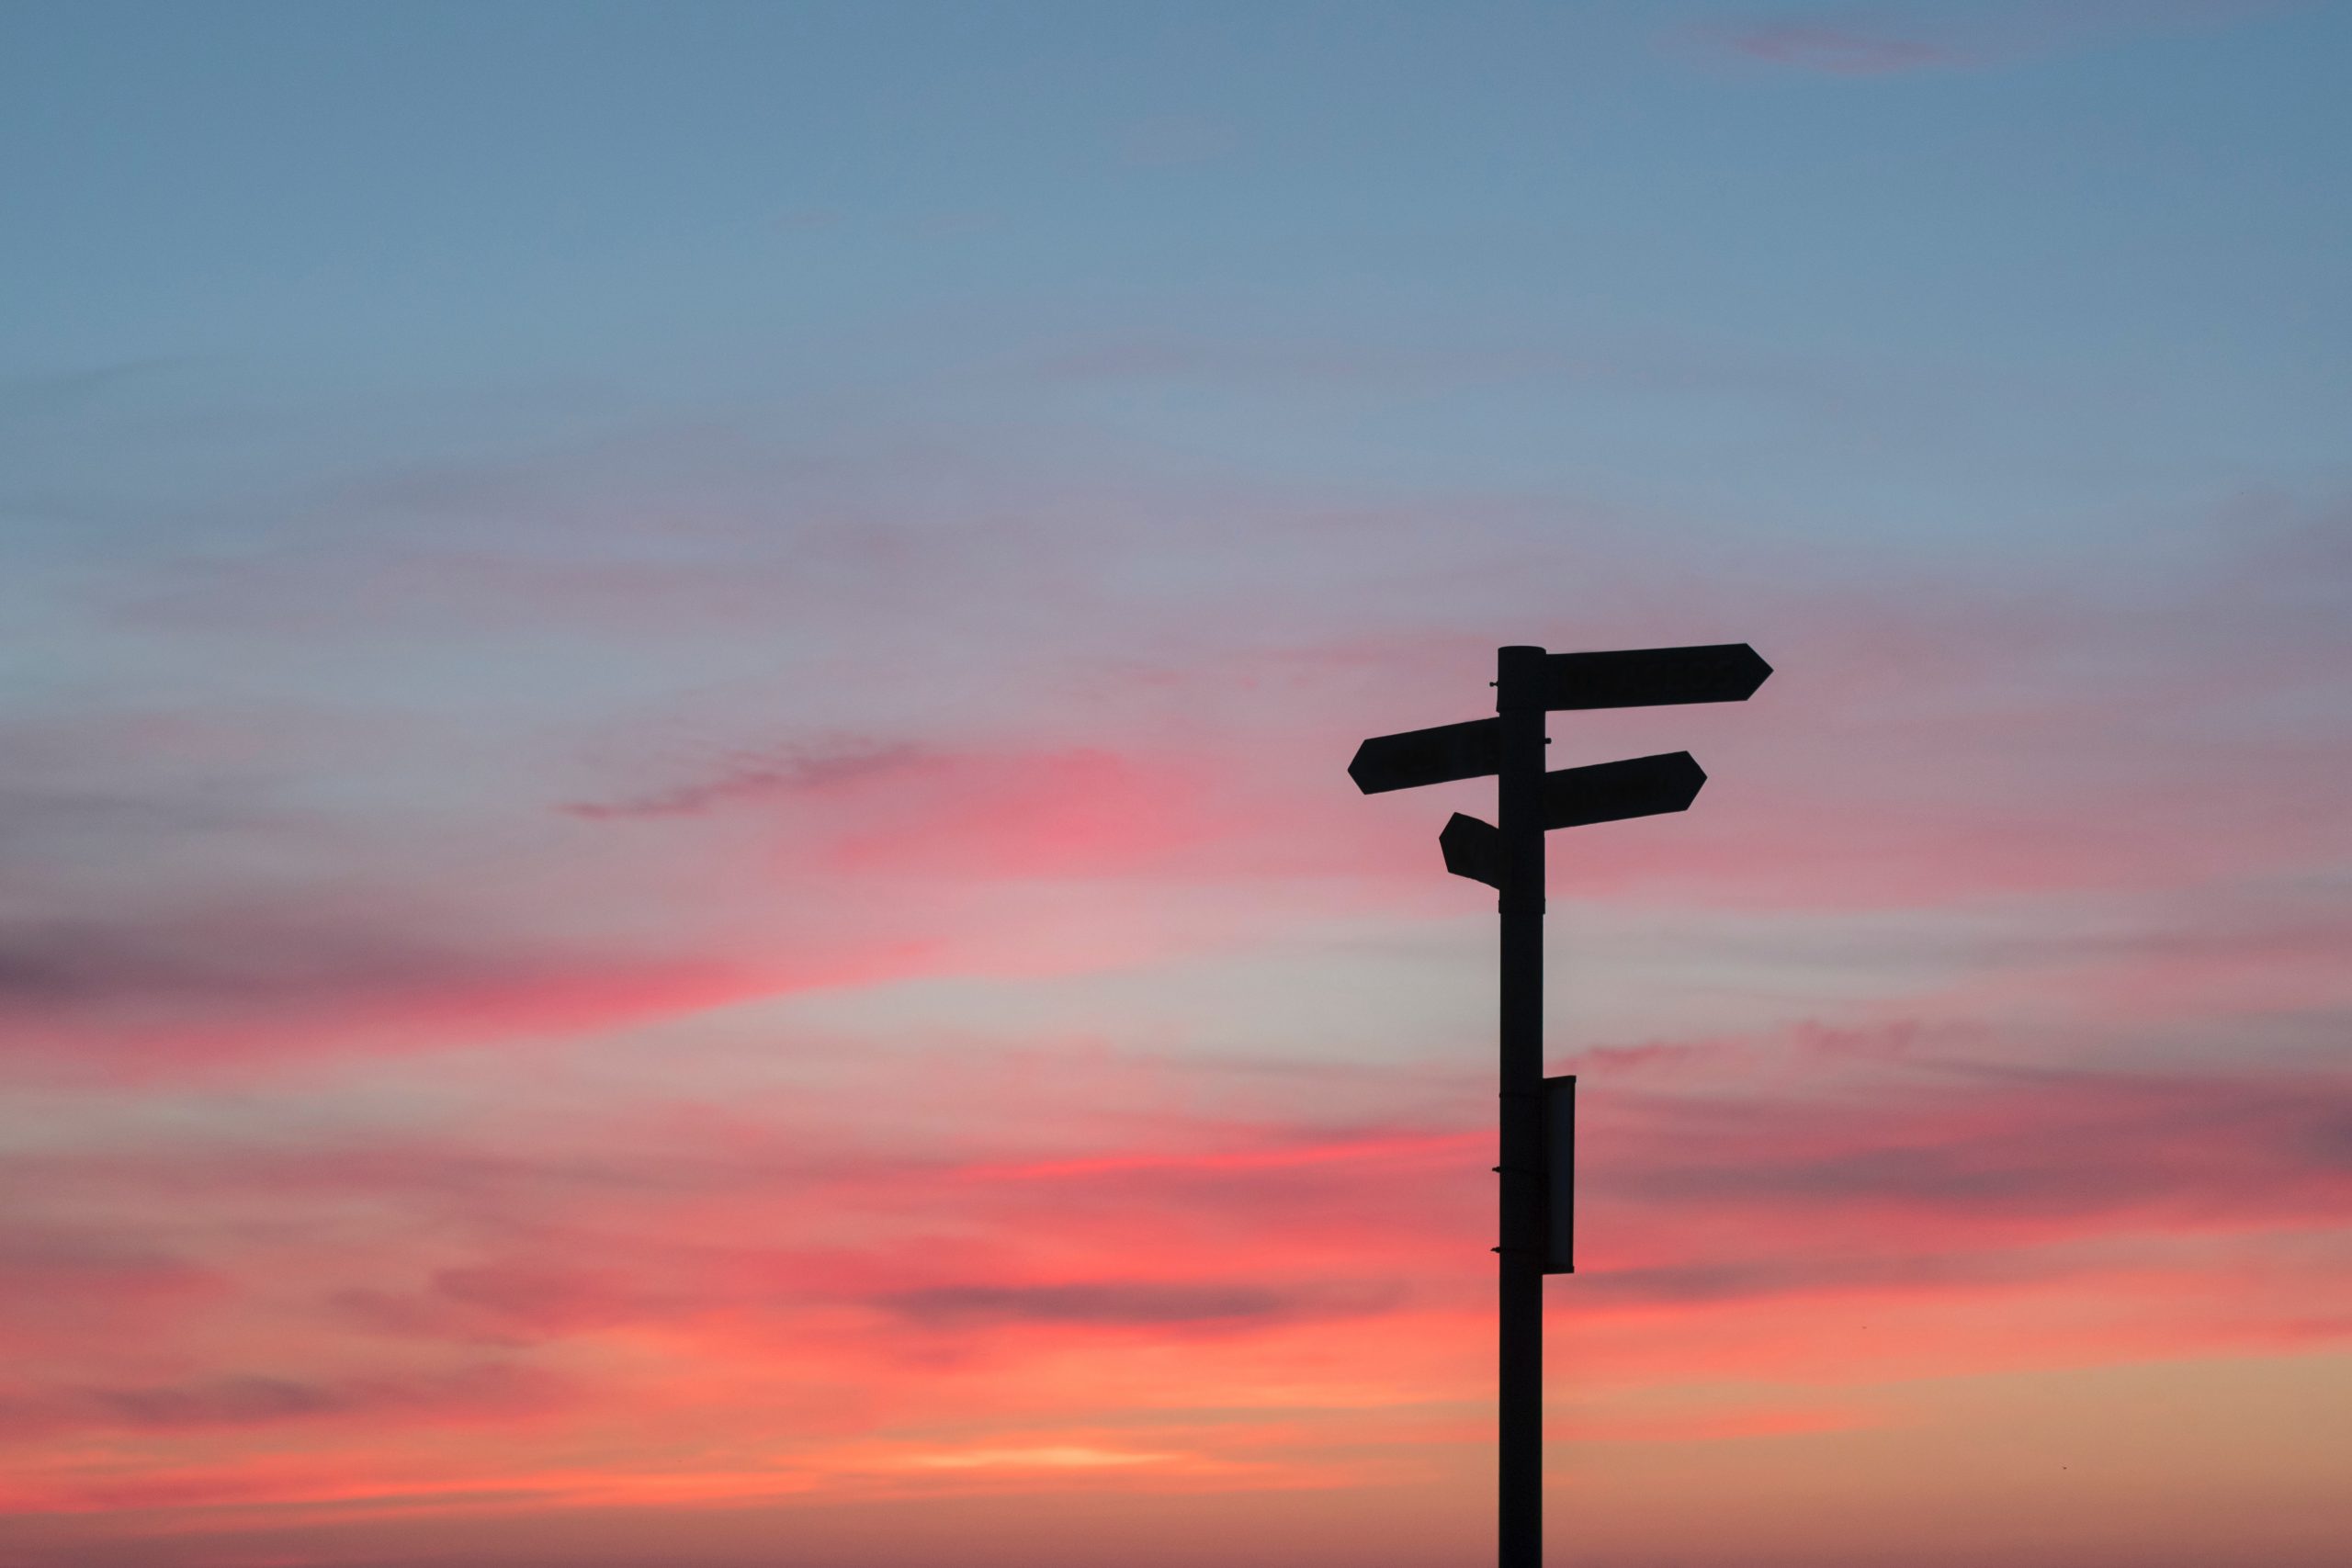 Blank direction signpost against a vibrant sunset sky.